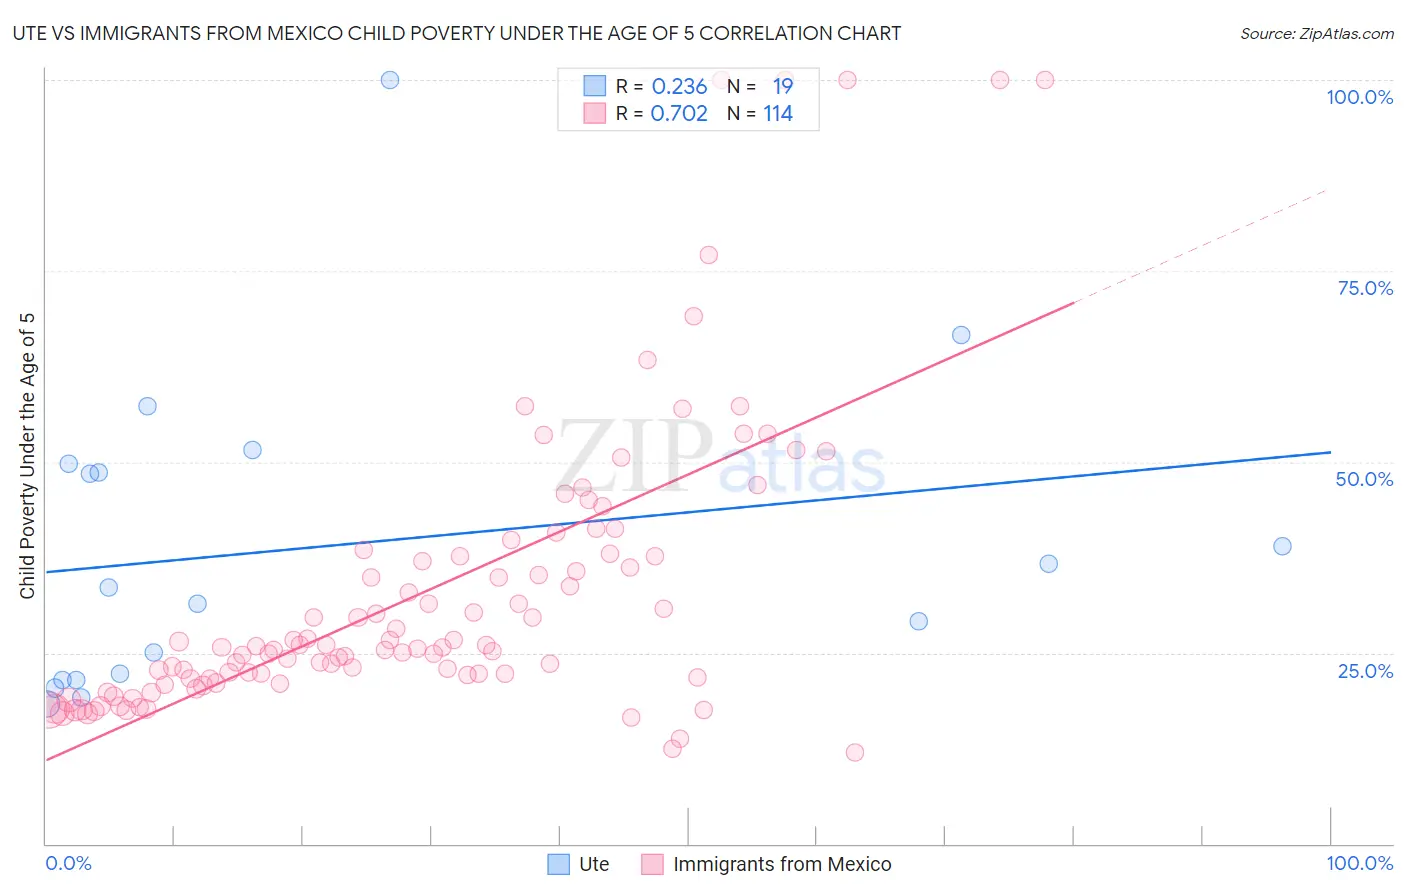 Ute vs Immigrants from Mexico Child Poverty Under the Age of 5